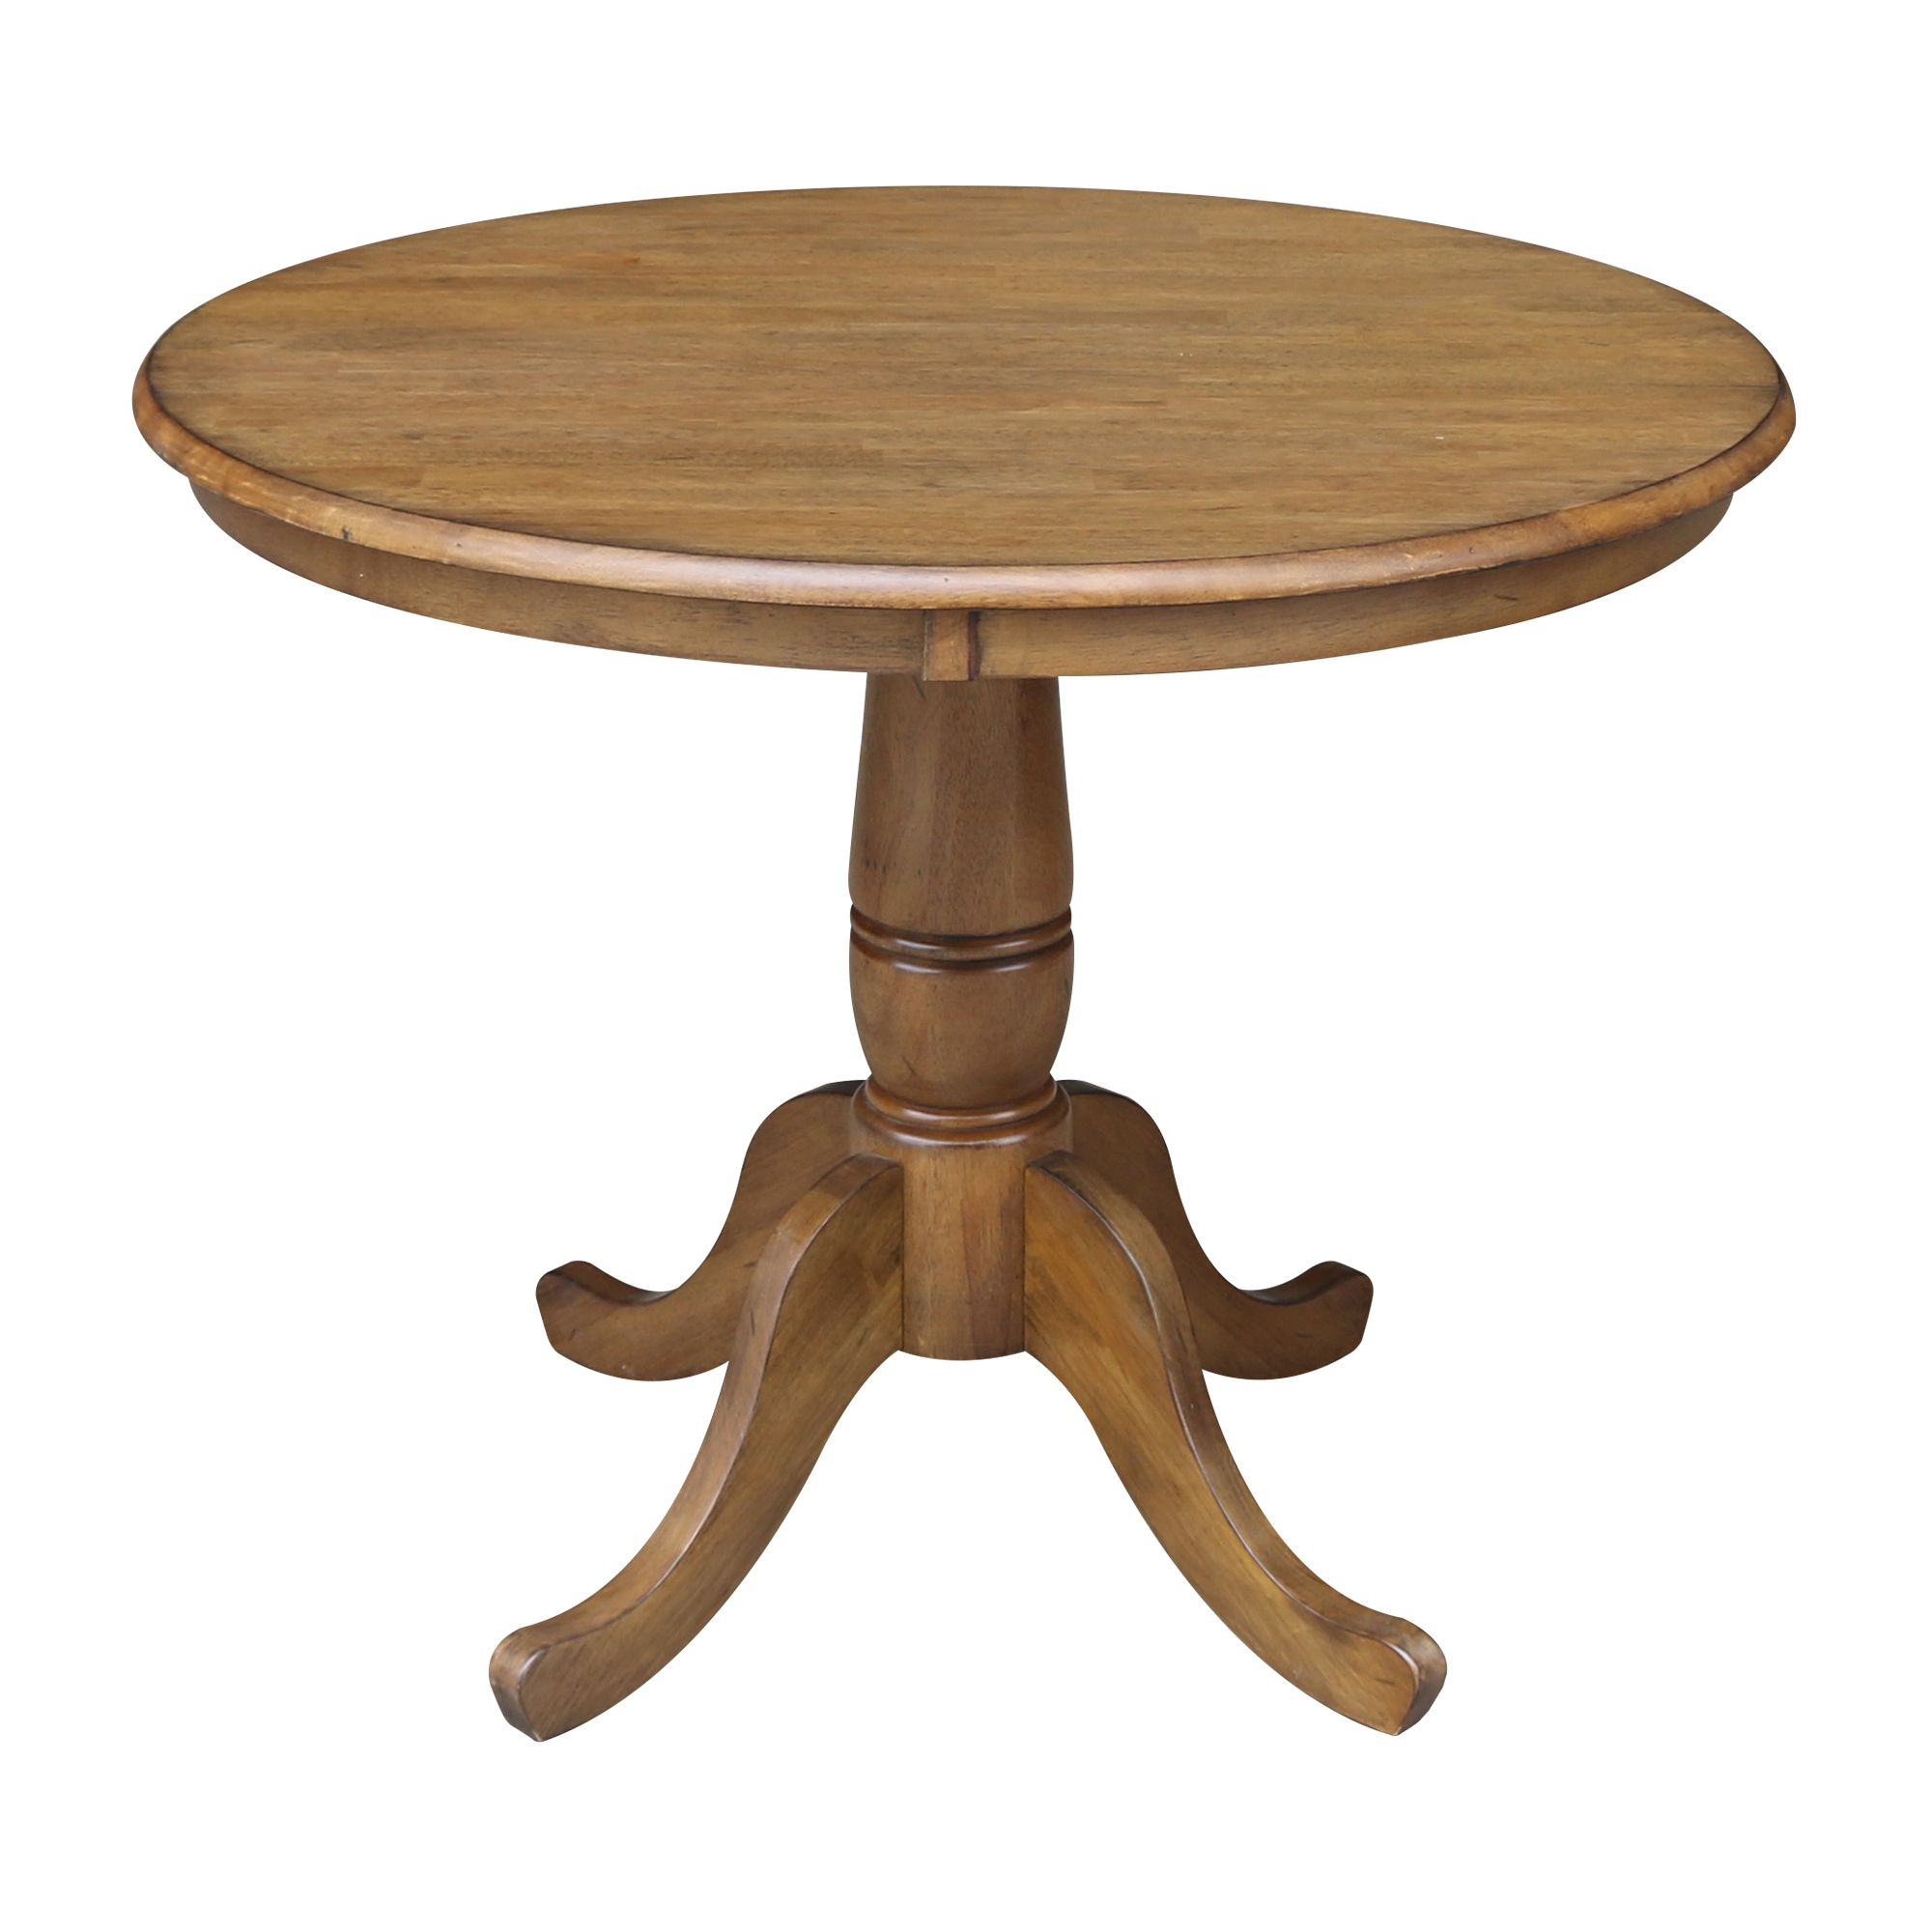 36" Round Top Dining Table In Pecan – Walmart With Regard To Recent Cainsville 32'' Dining Tables (View 4 of 15)